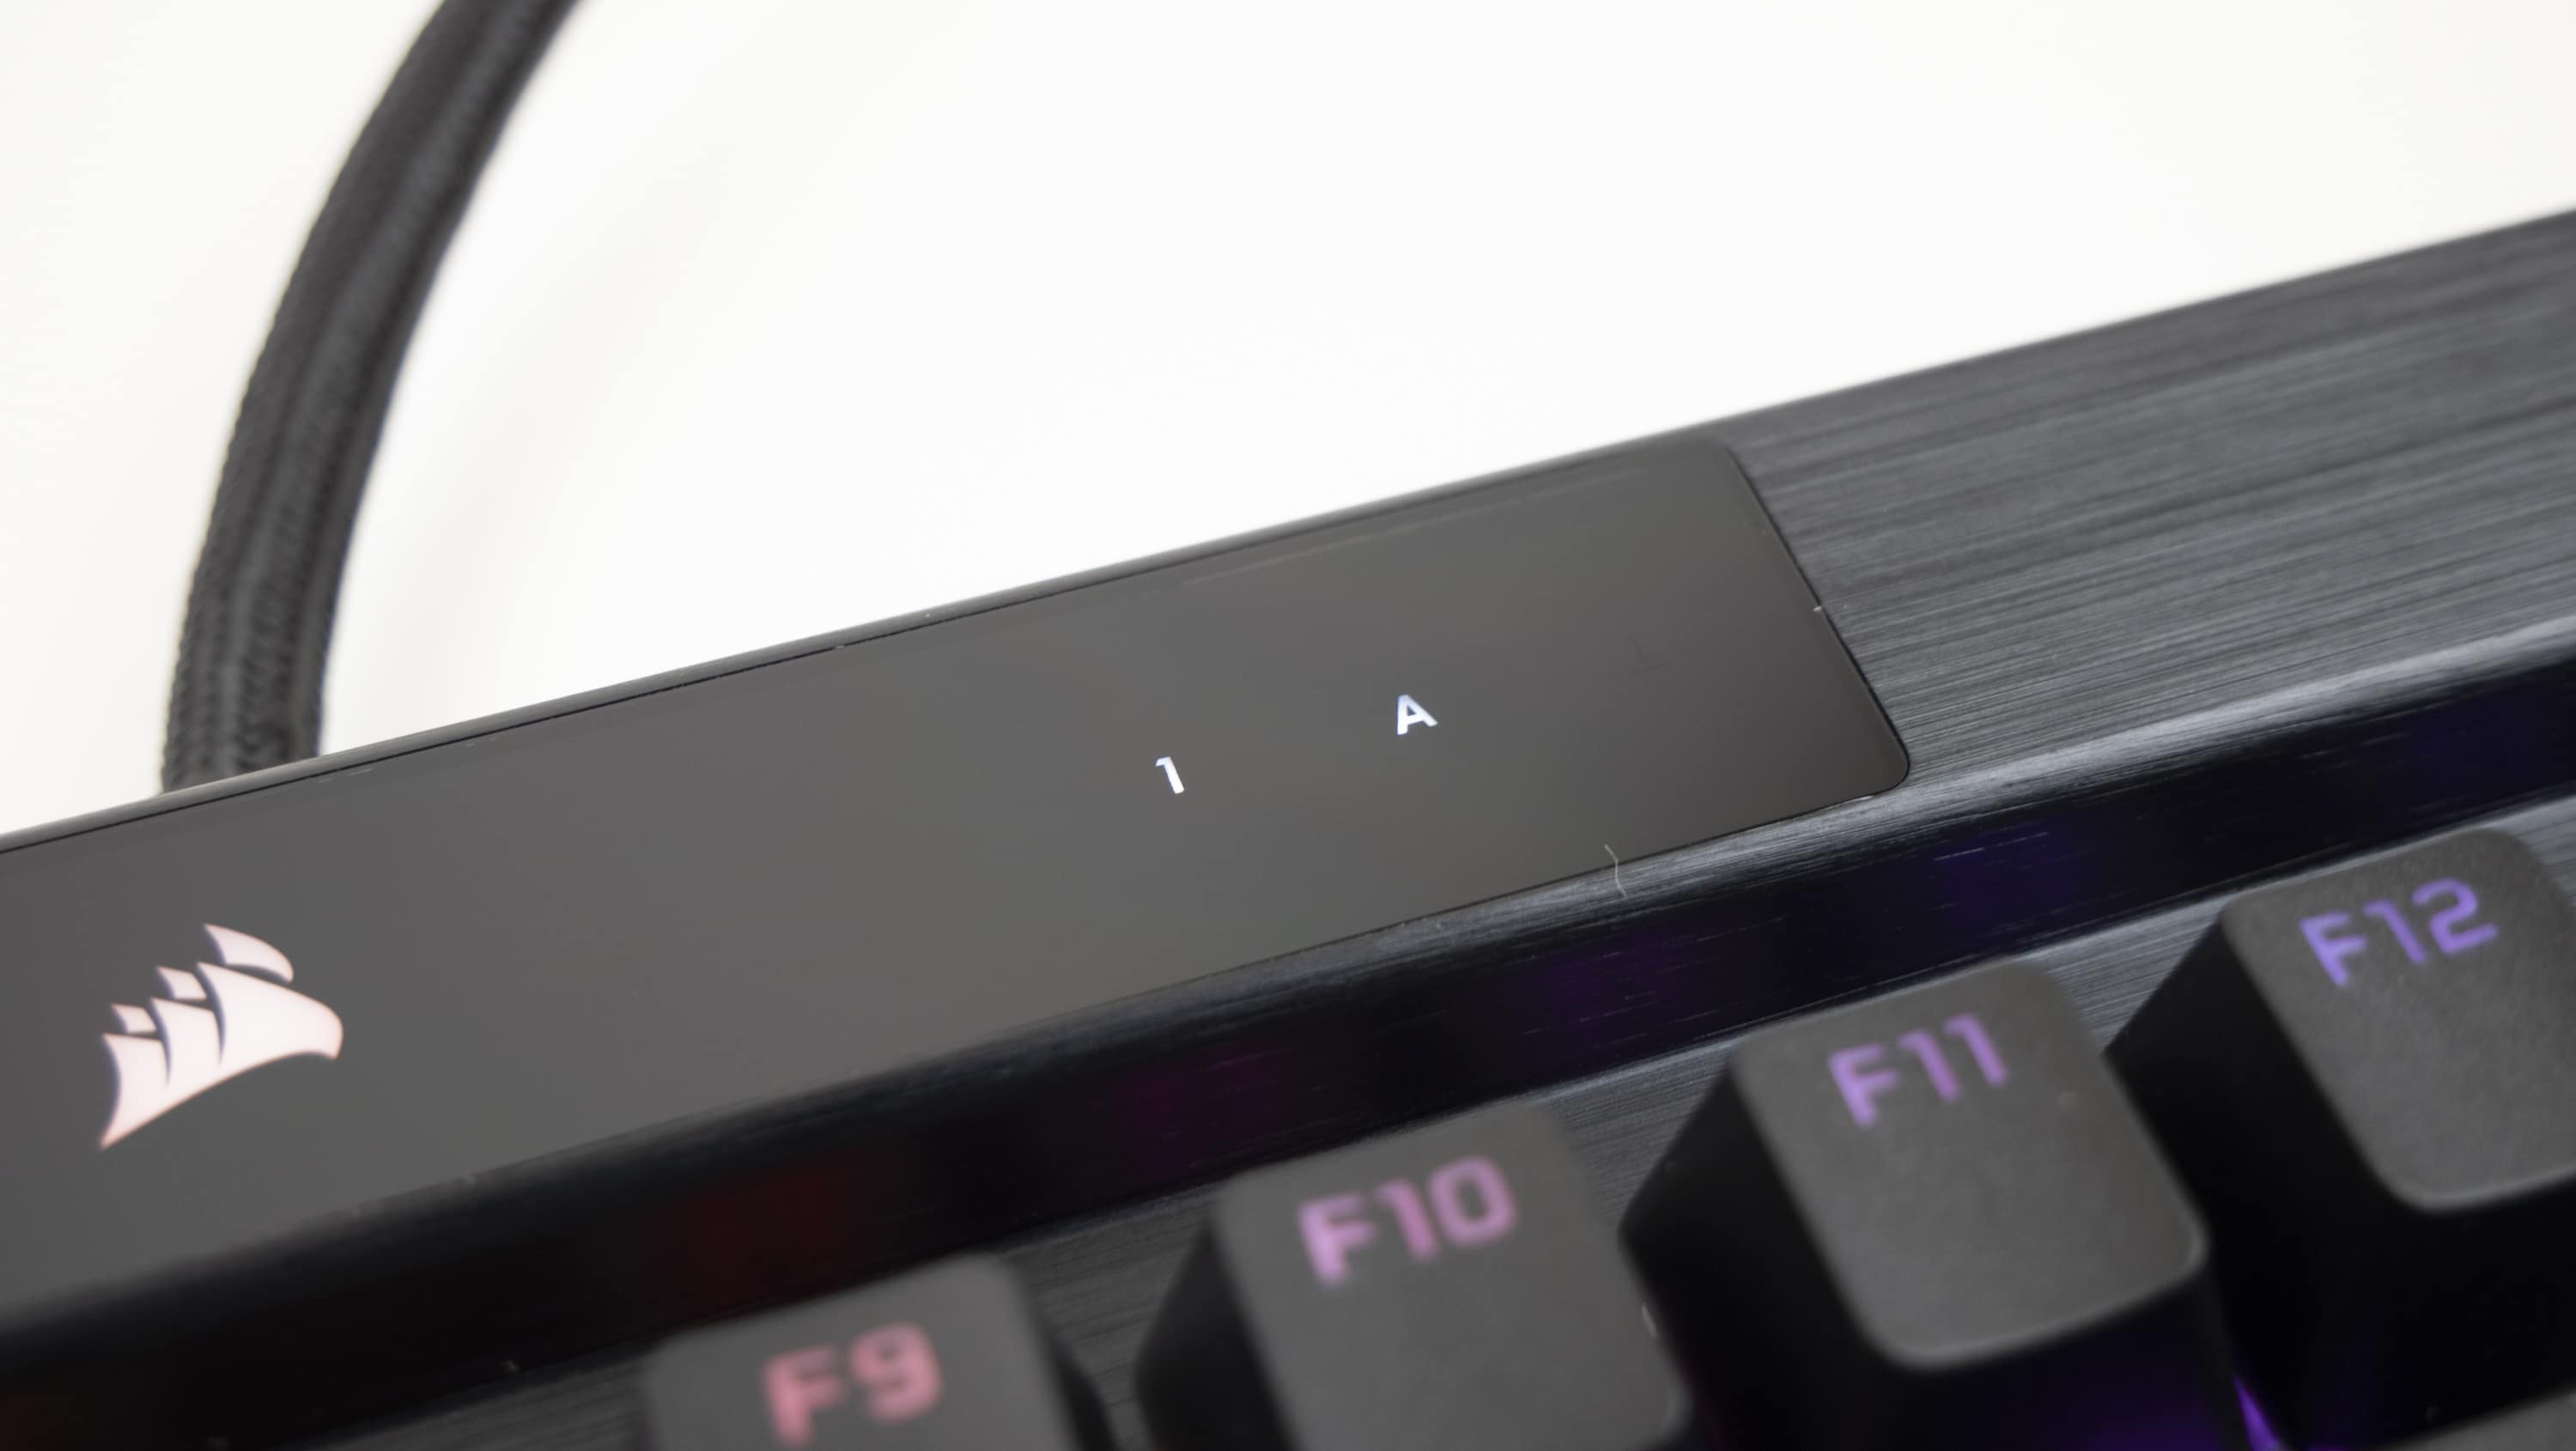 the plus ultra Corsair new keyboards non RGB: The under K100 gaming